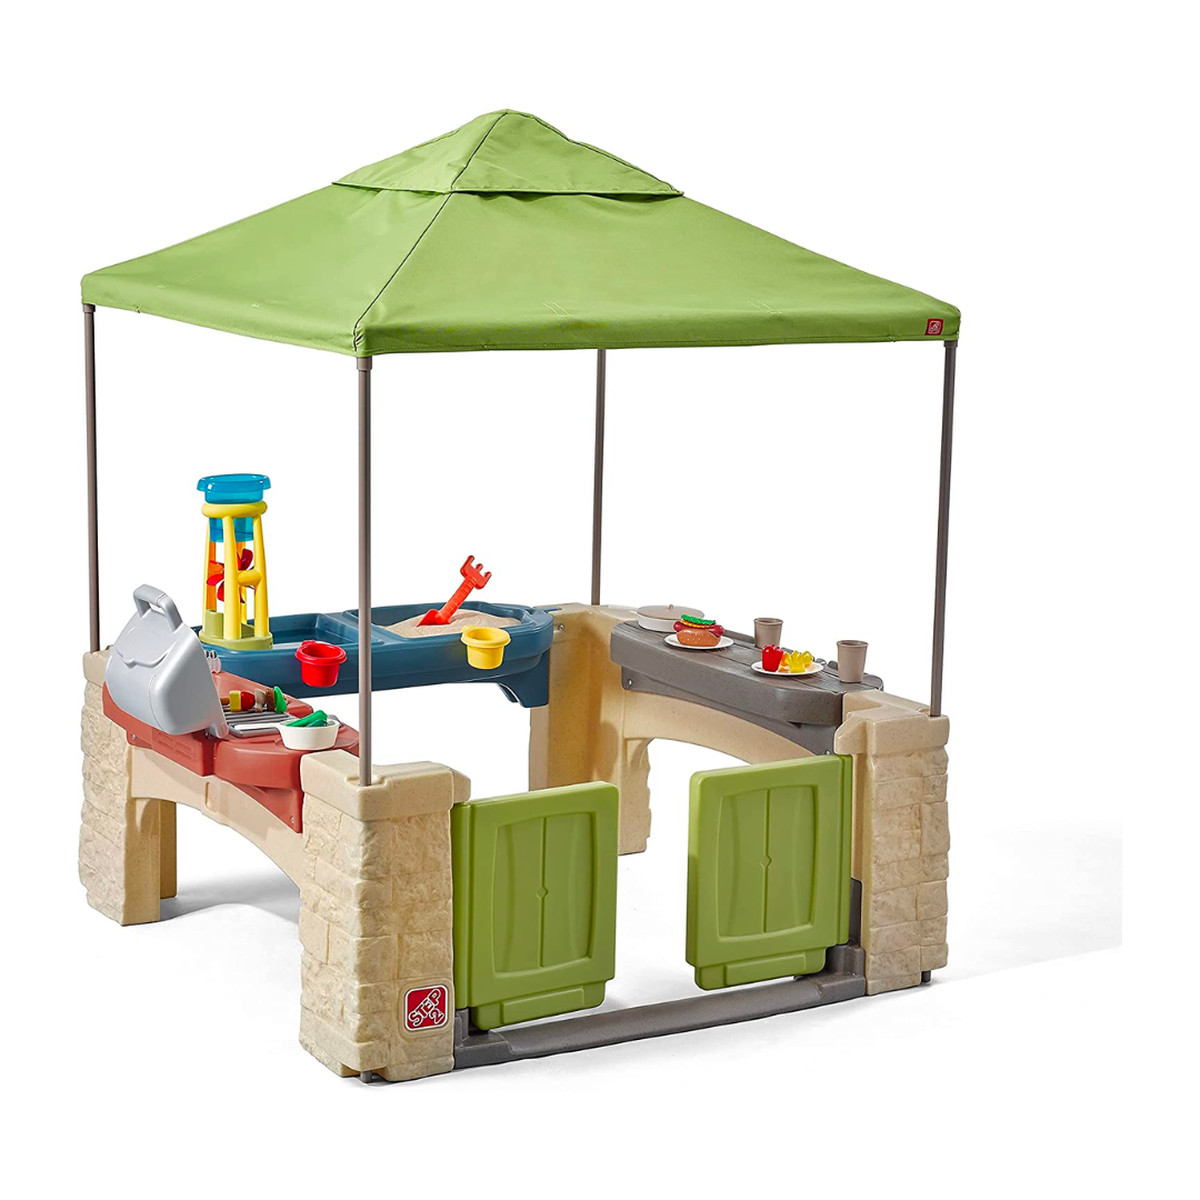 Step2 interactive plastic playset with green canopy